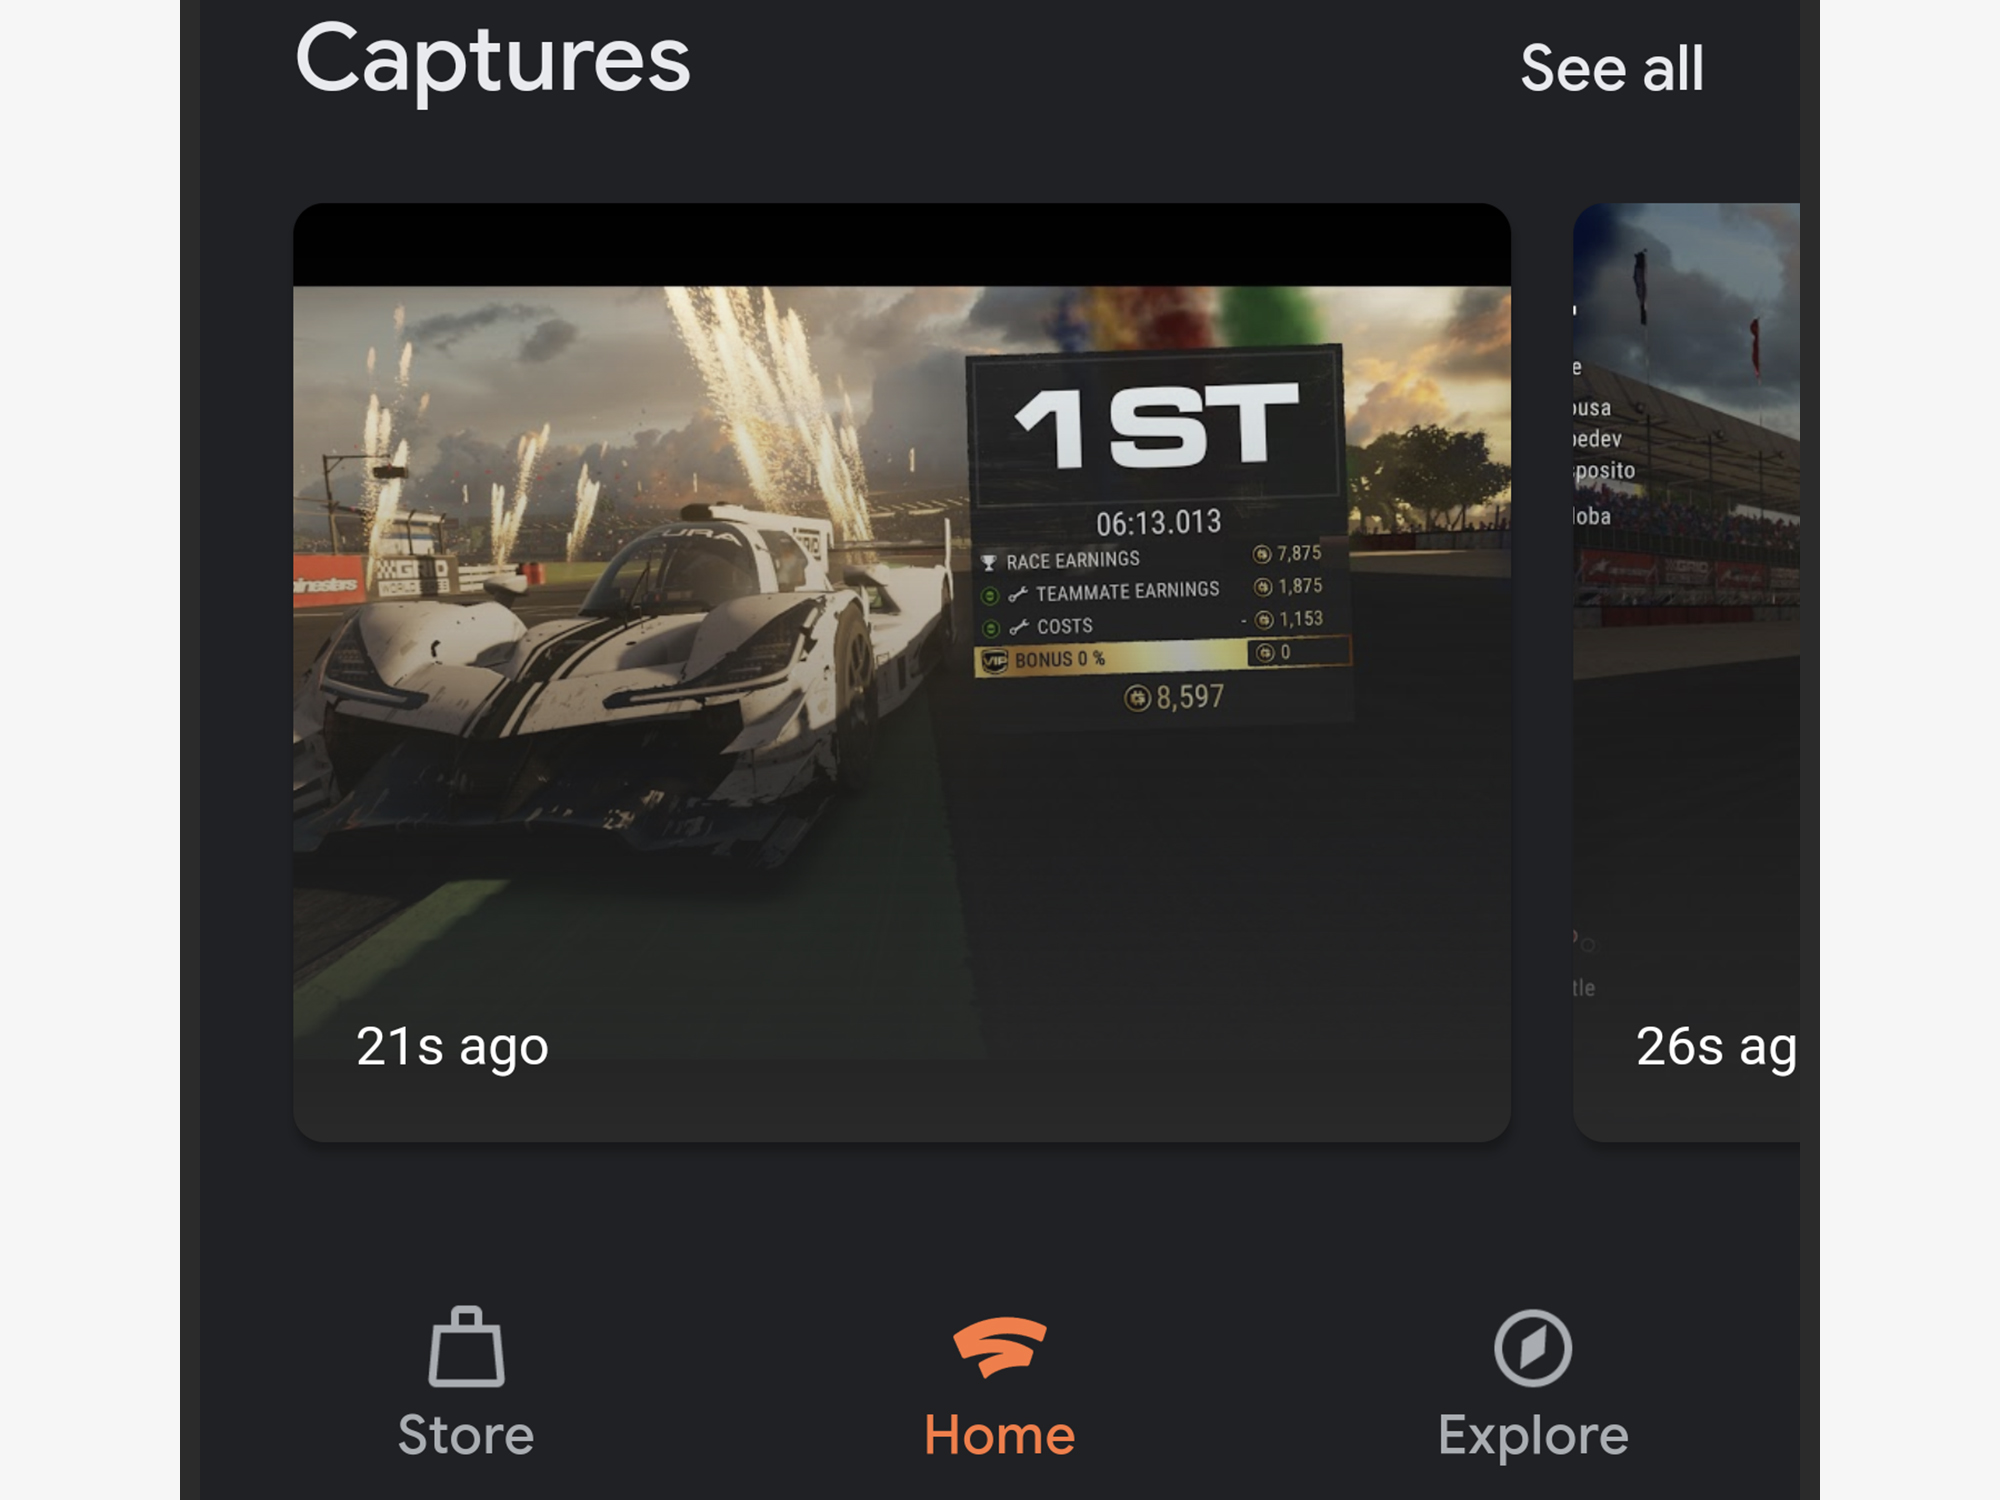 a screenshot of the captures screen in Google Stadia